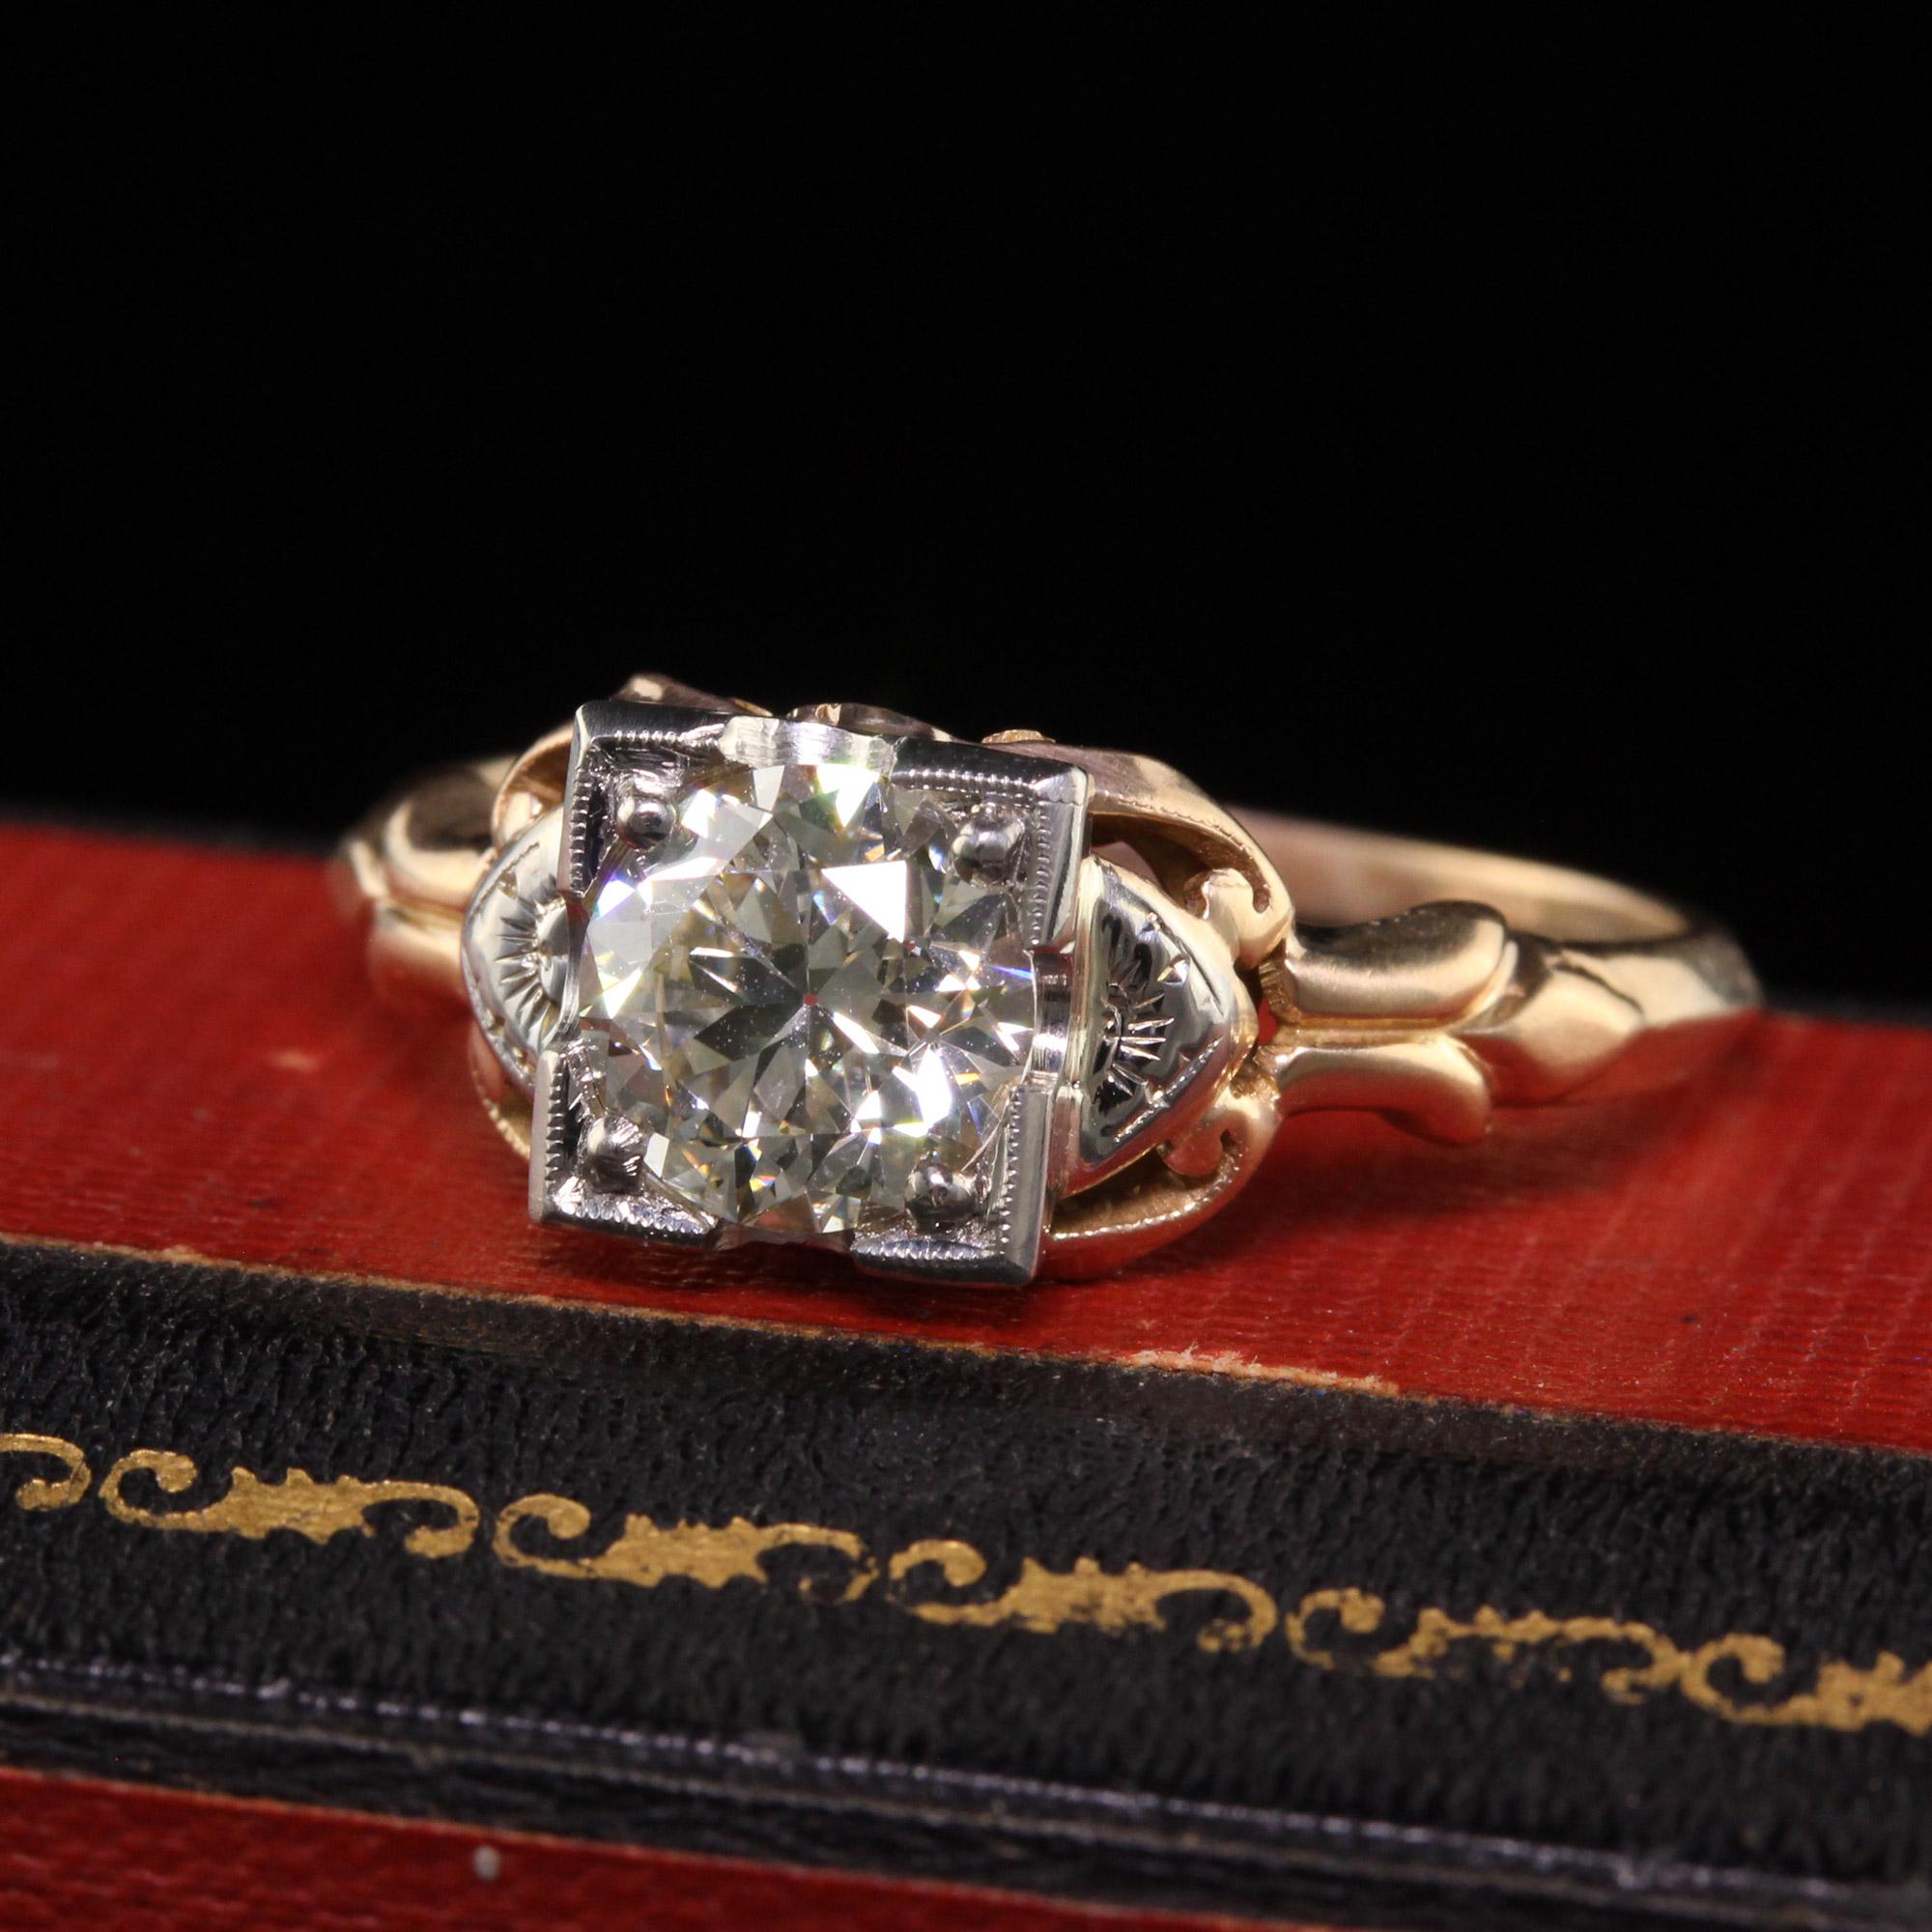 Beautiful Antique Art Deco 18K and 14K Yellow Gold Old Euro Diamond Engagement Ring. This gorgeous engagement ring is crafte din 18k yellow gold and 14k white gold. The center holds an old european cut diamond in a classic art deco mounting that